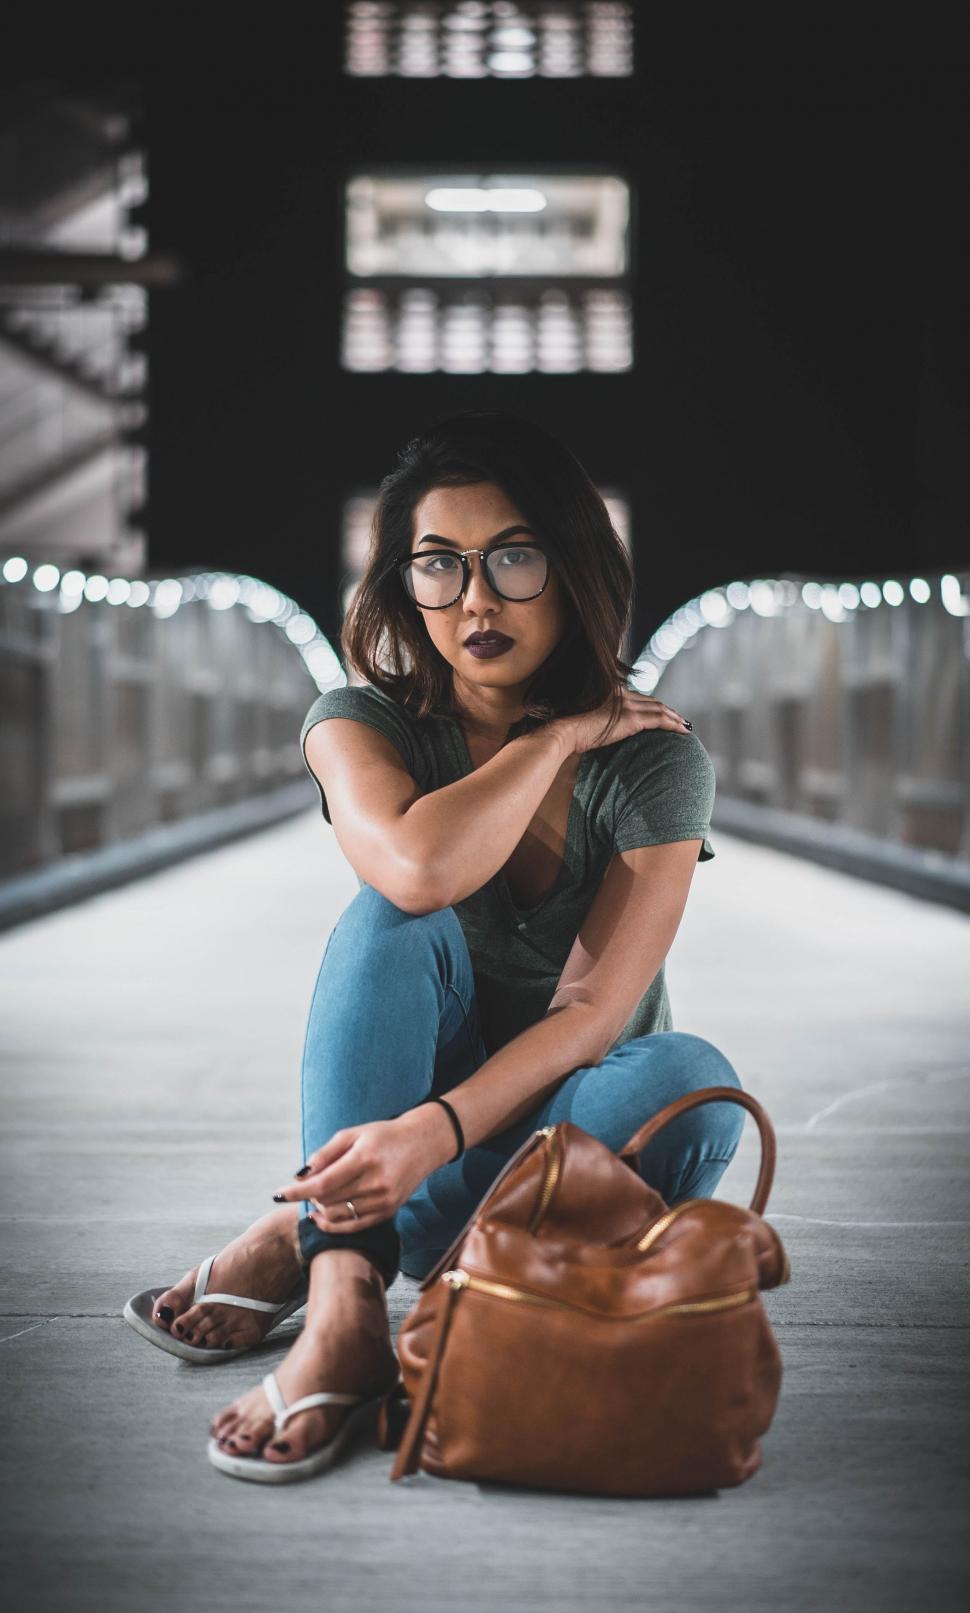 Free Image of Woman Sitting on Ground With Purse 